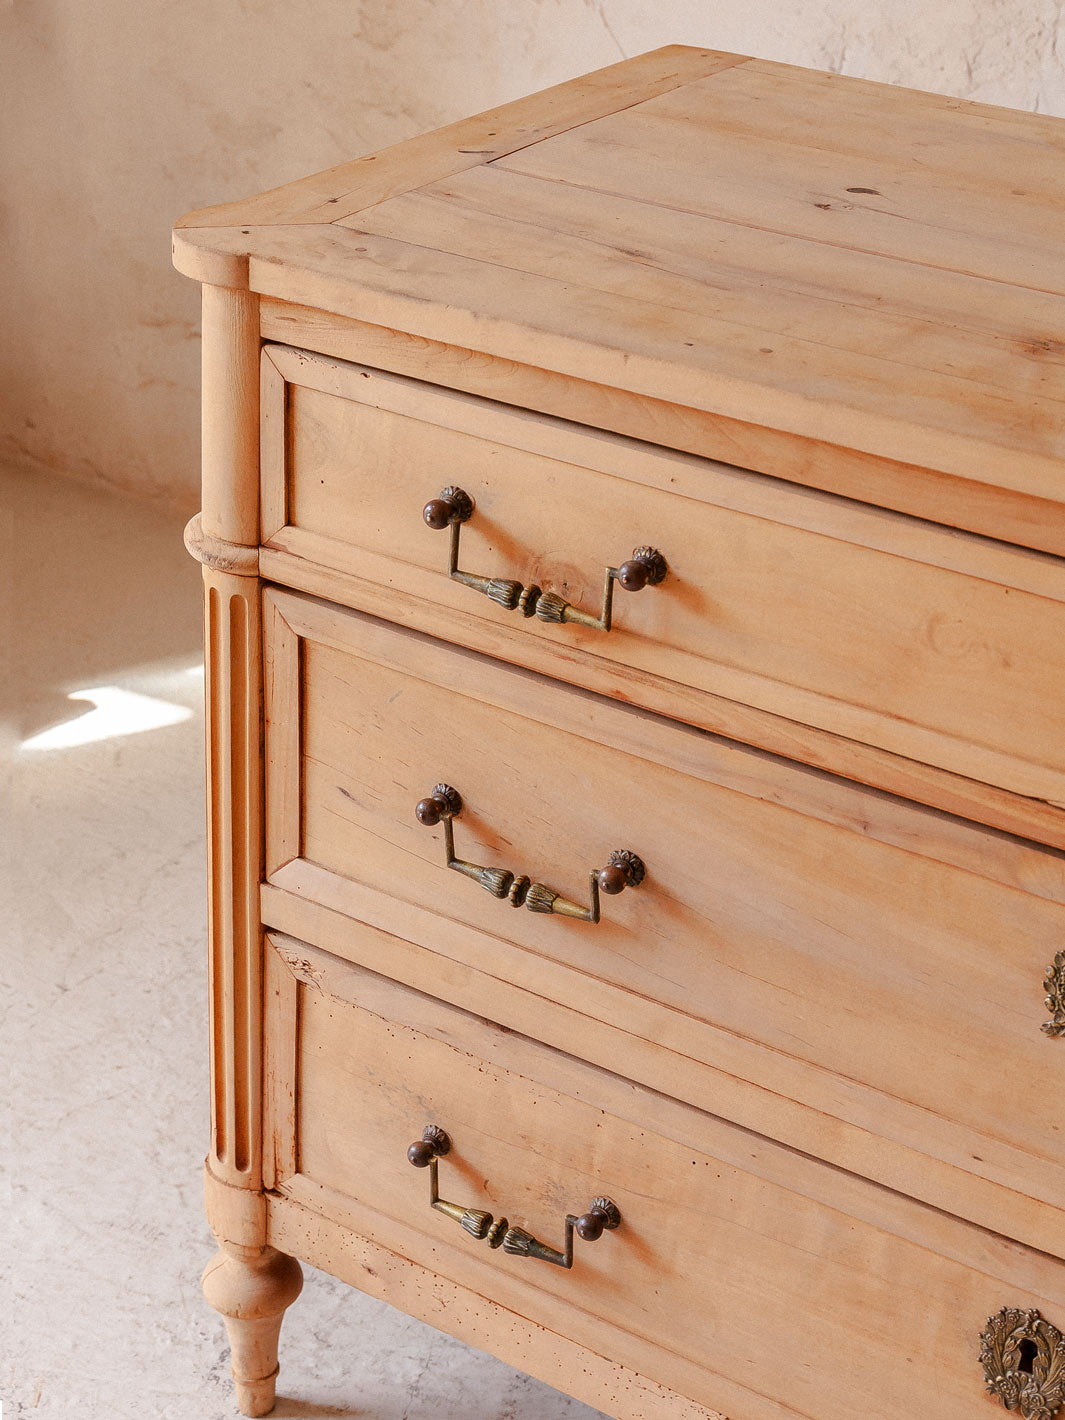 19th century washed chestnut French chest of drawers